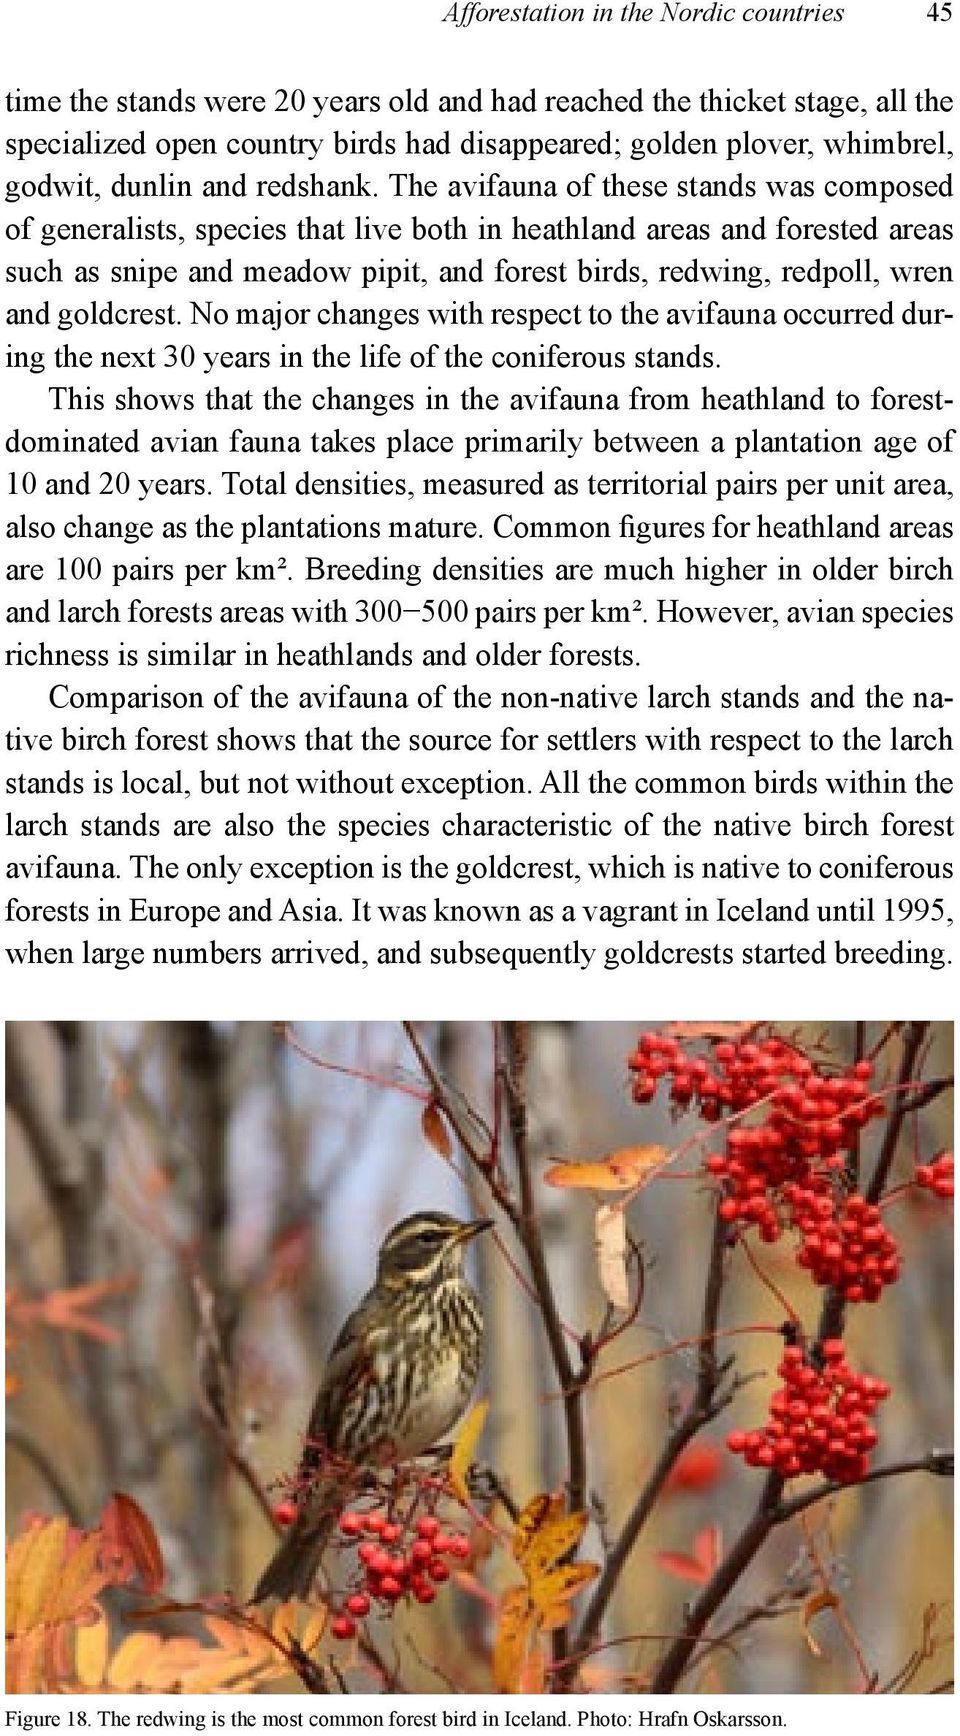 The avifauna of these stands was composed of generalists, species that live both in heathland areas and forested areas such as snipe and meadow pipit, and forest birds, redwing, redpoll, wren and